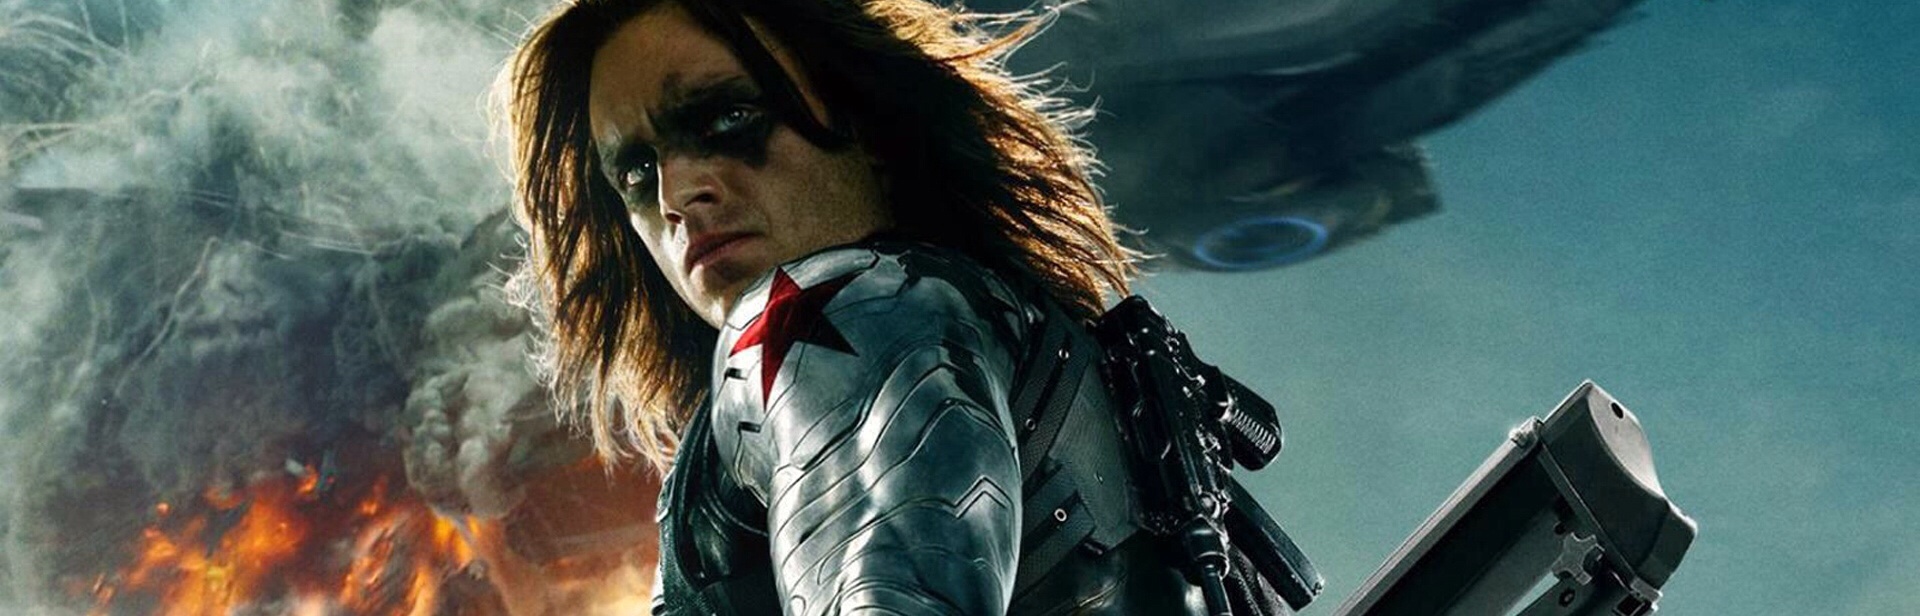 Captain America: The Winter Soldier Blu-ray Steelbook is now shipping from Amazon in Germany